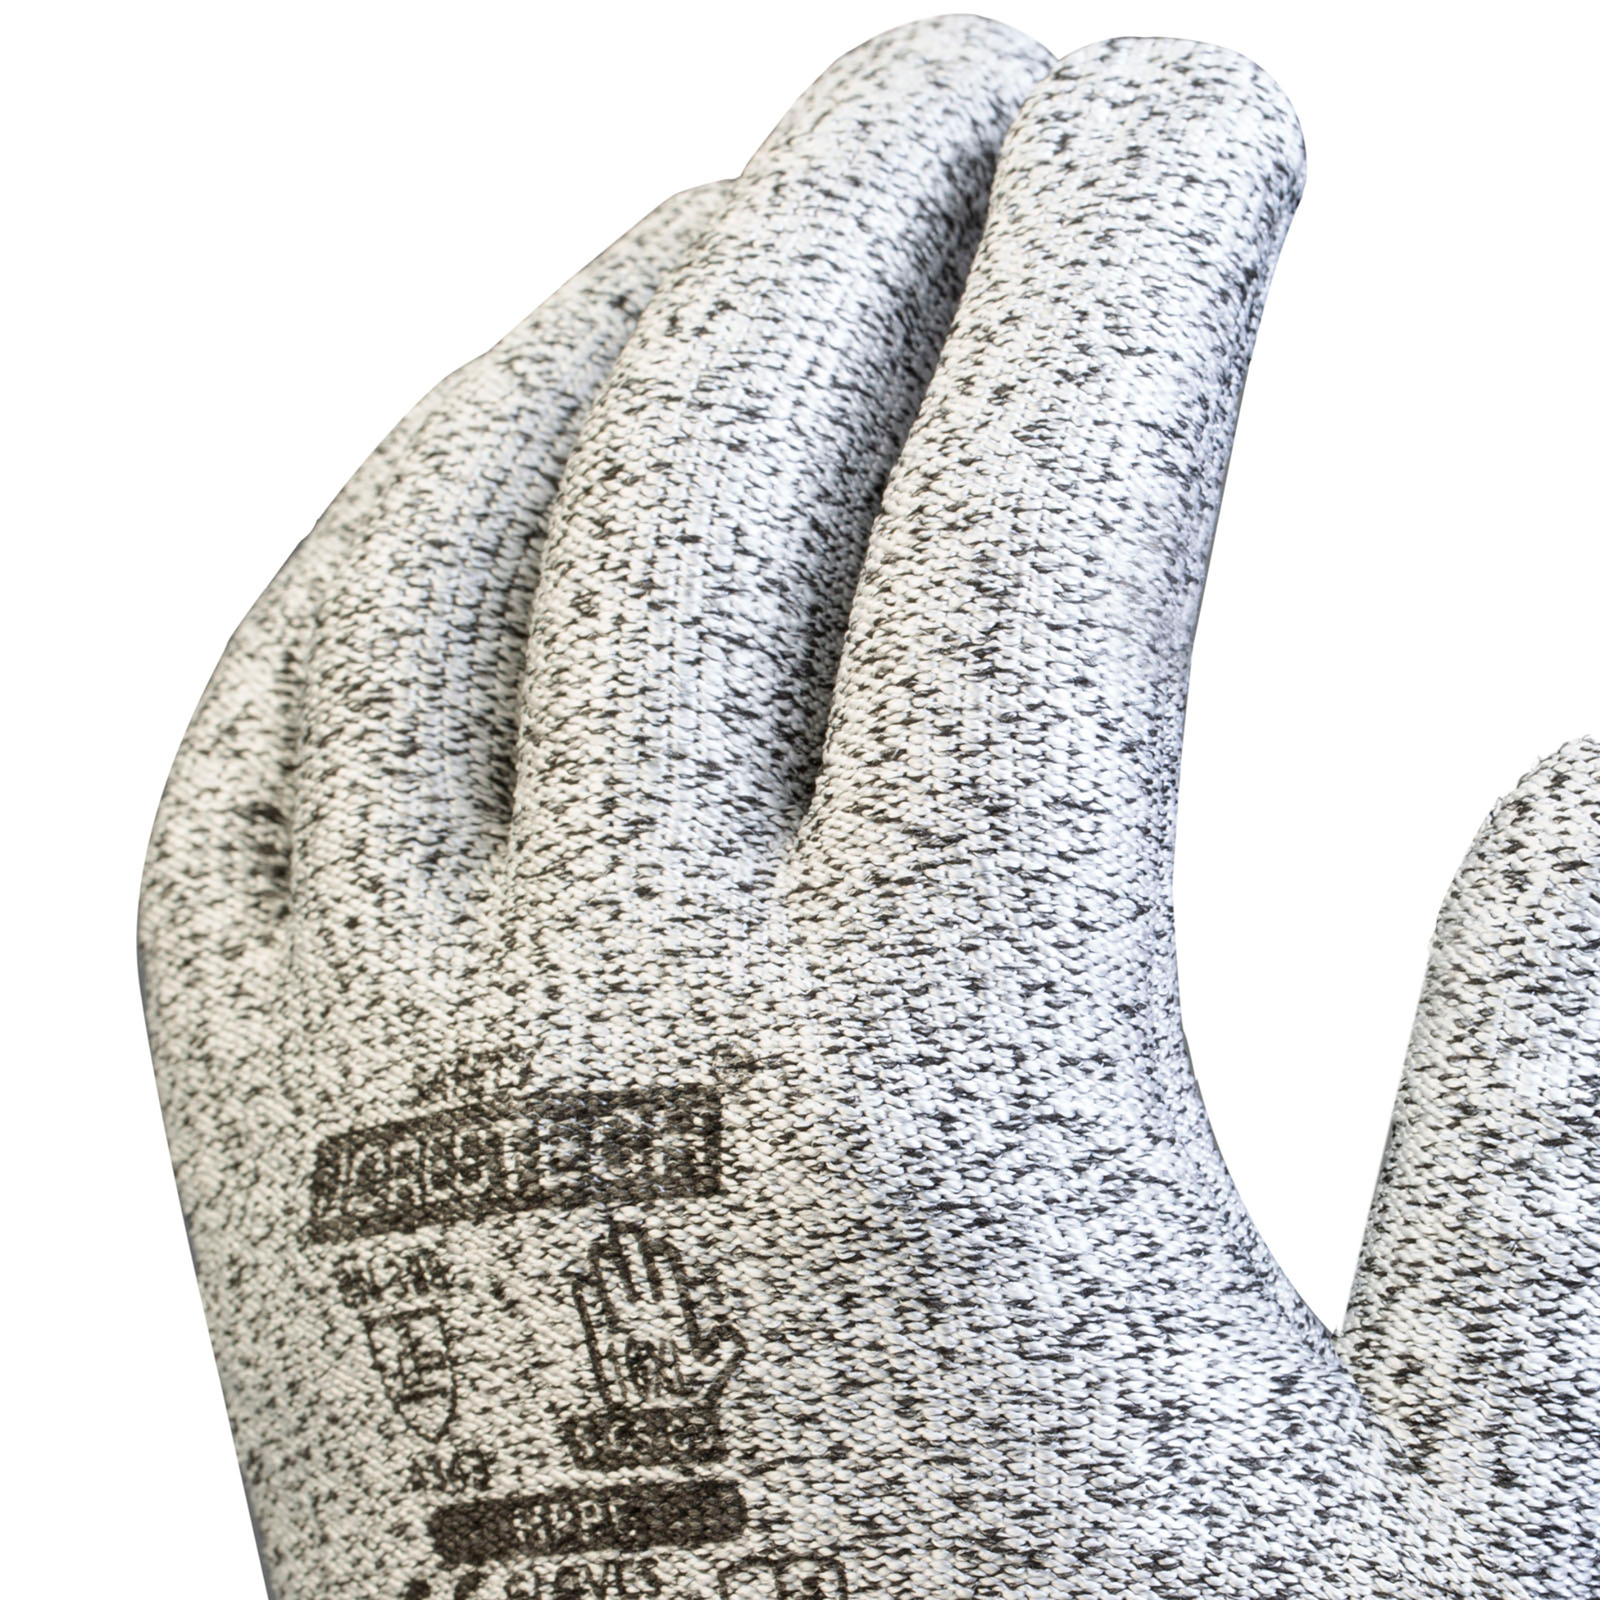 Closeup to show the knitted grey and white fabric of the Jorestech multi-purpose safety work glove